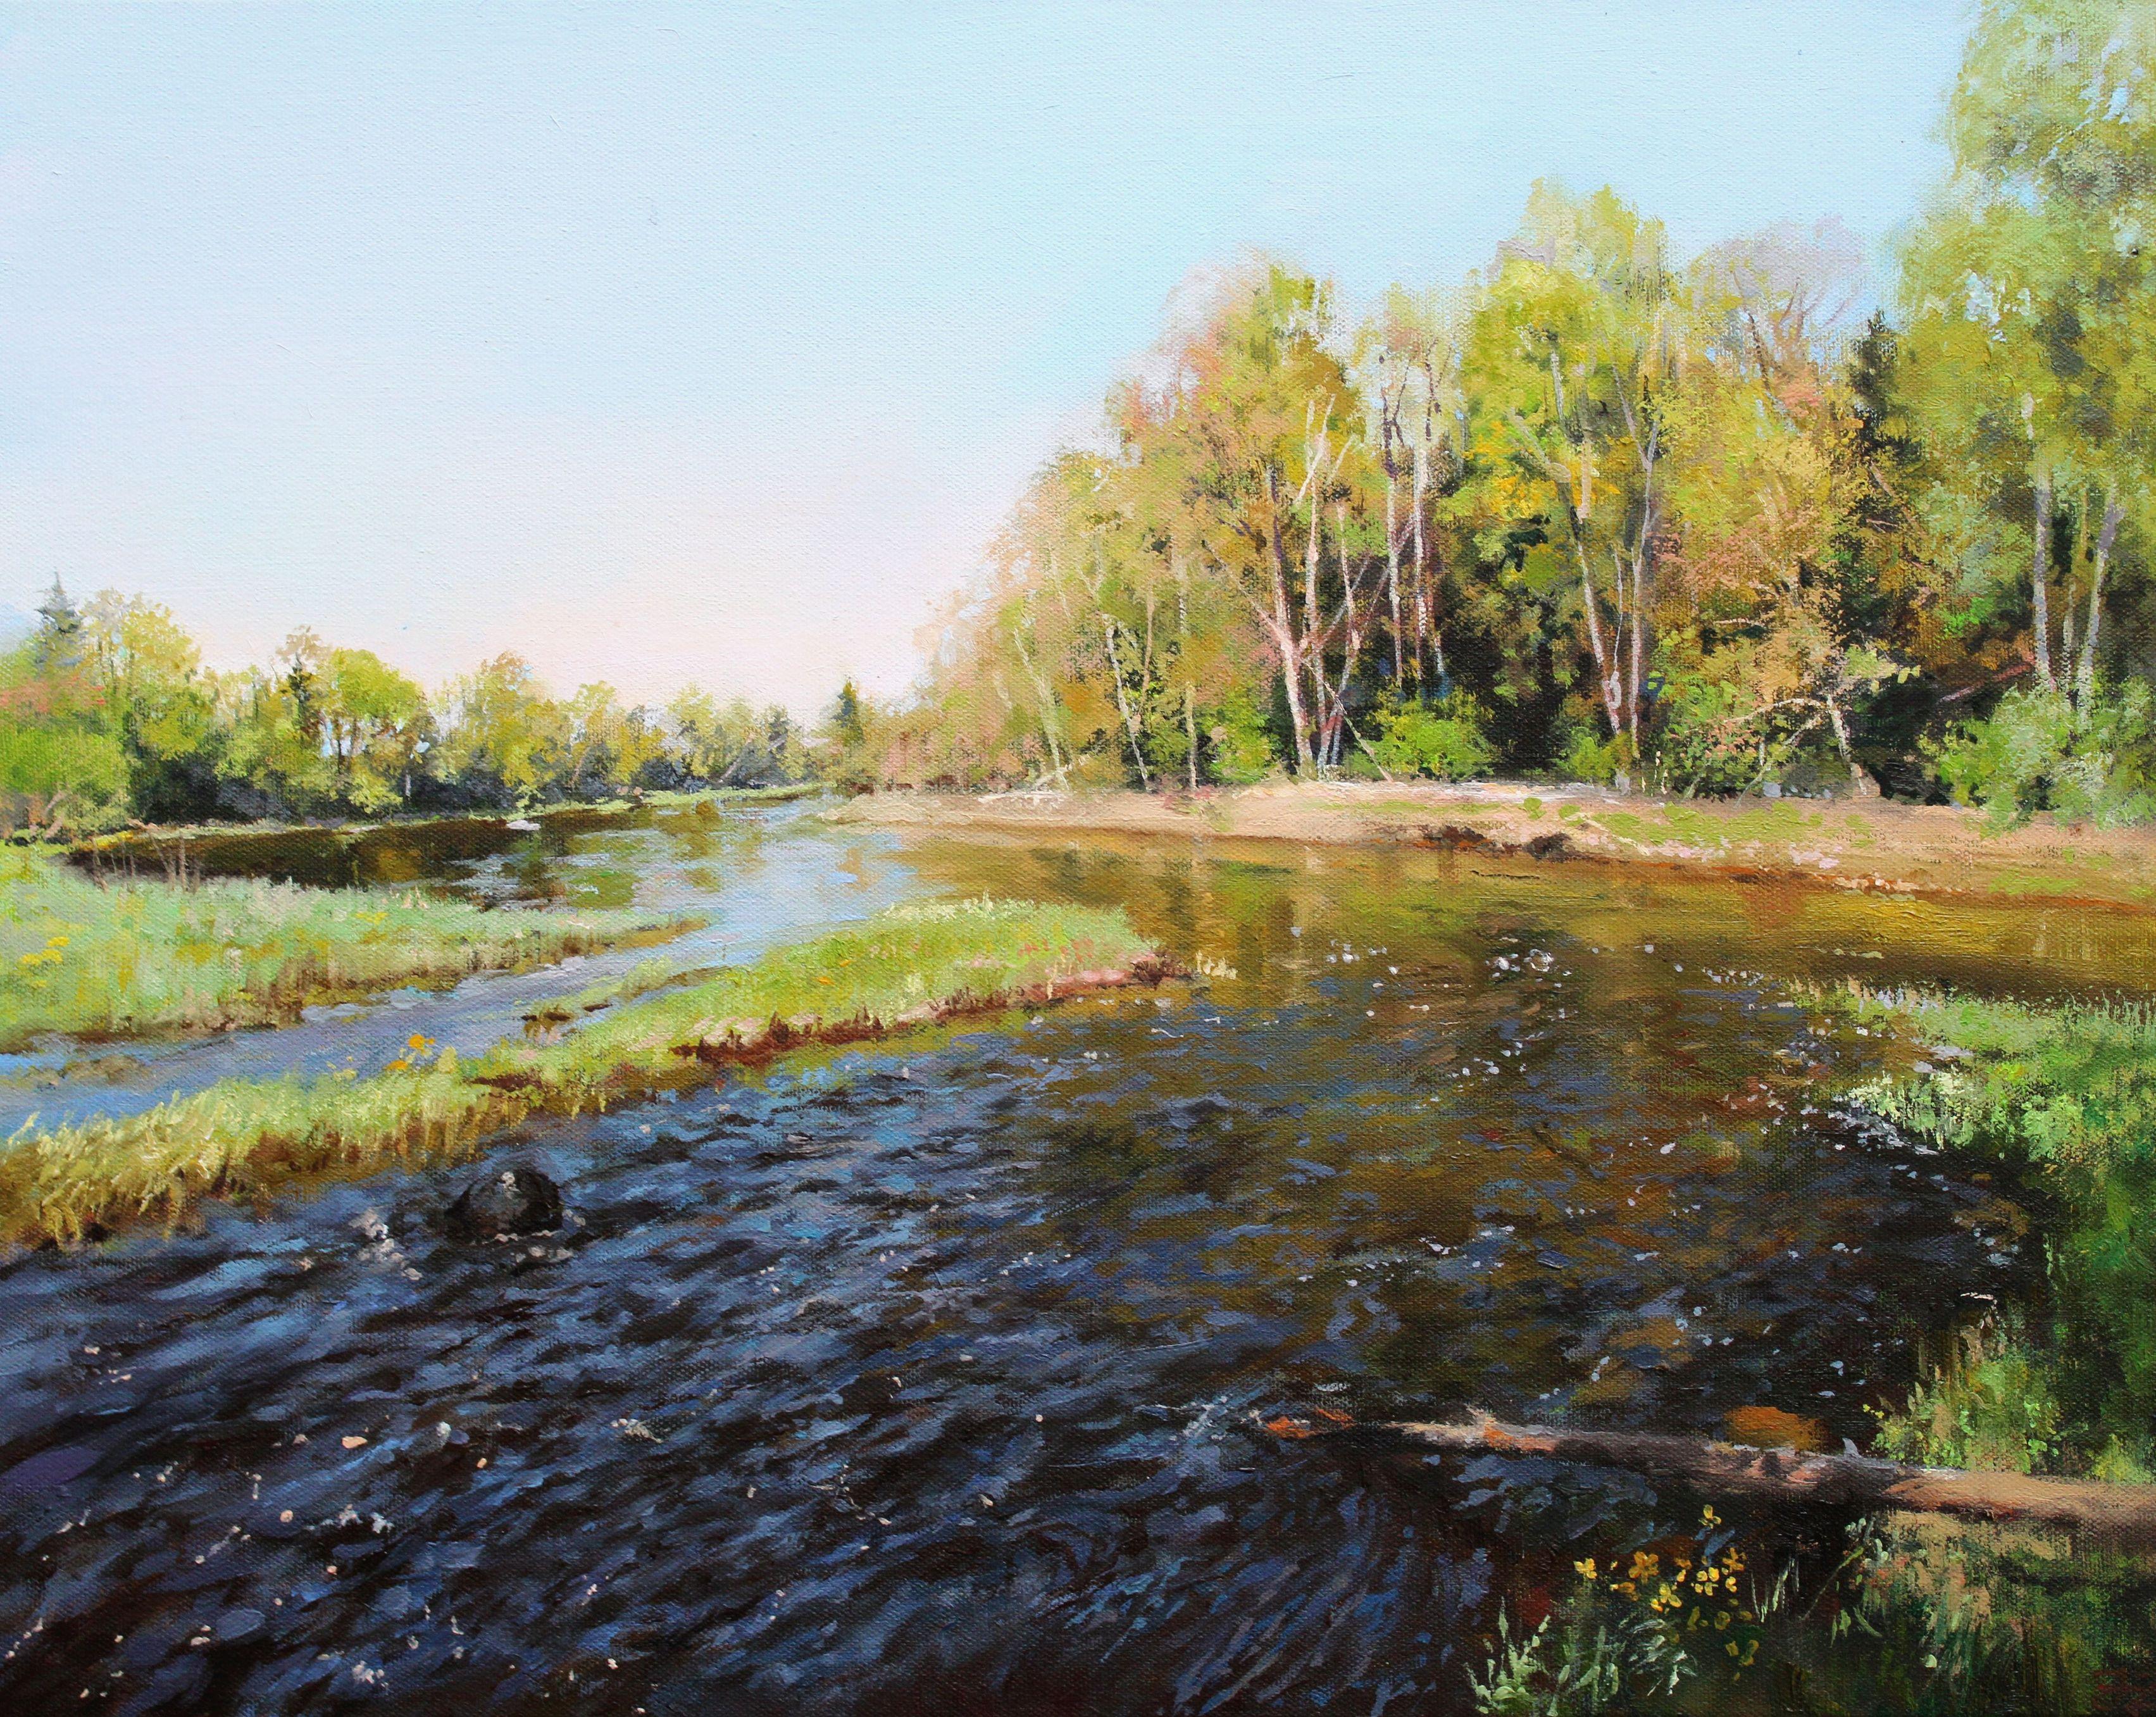 Janis Zingitis Landscape Painting - May. The Lobe River flows into Ogre. Oil on canvas, 40x50 cm